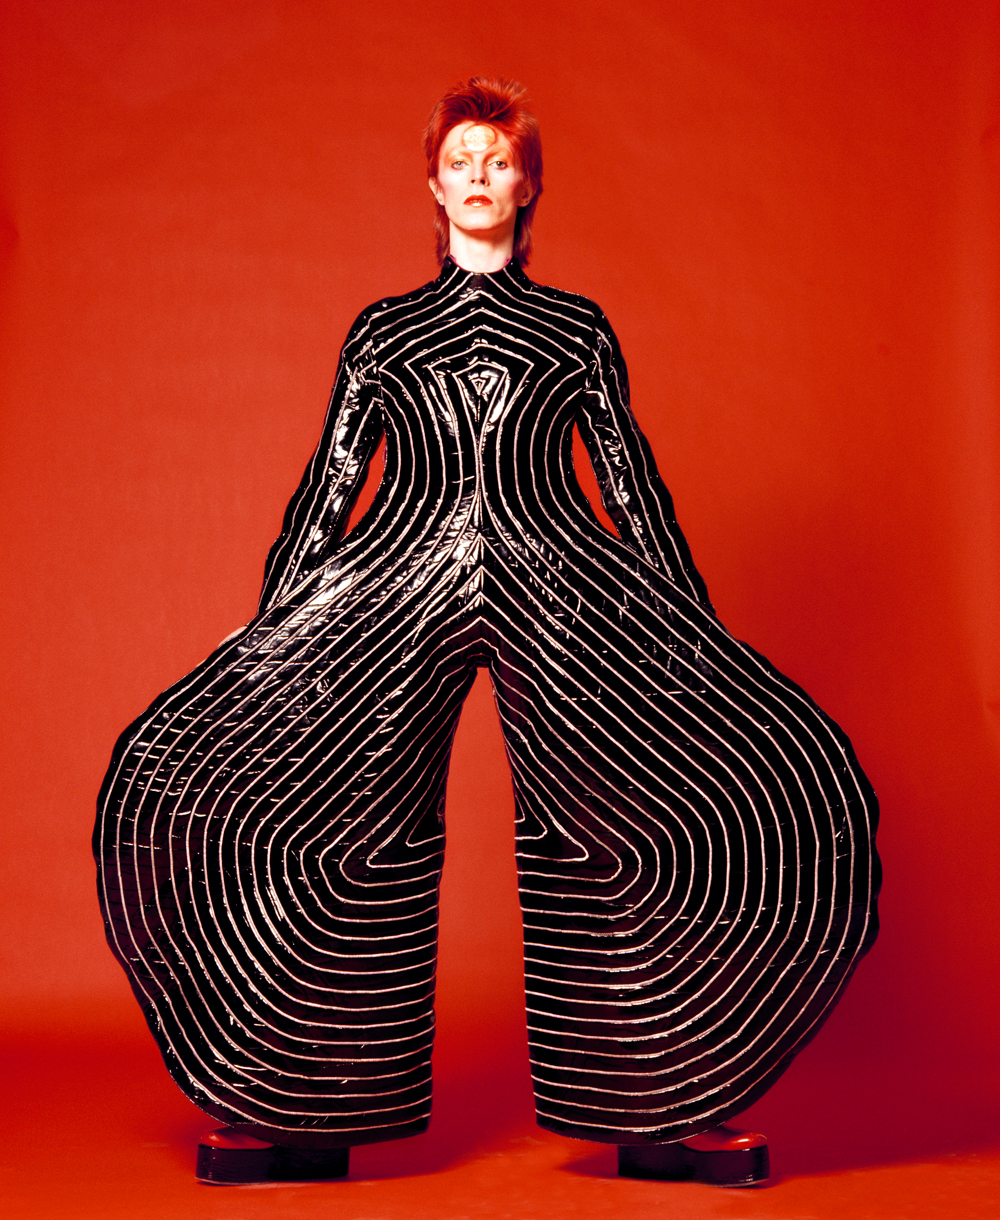 Bowie in a striped bodysuit designed by Kansai Yamamoto for the Aladdin Sane tour (1973) 